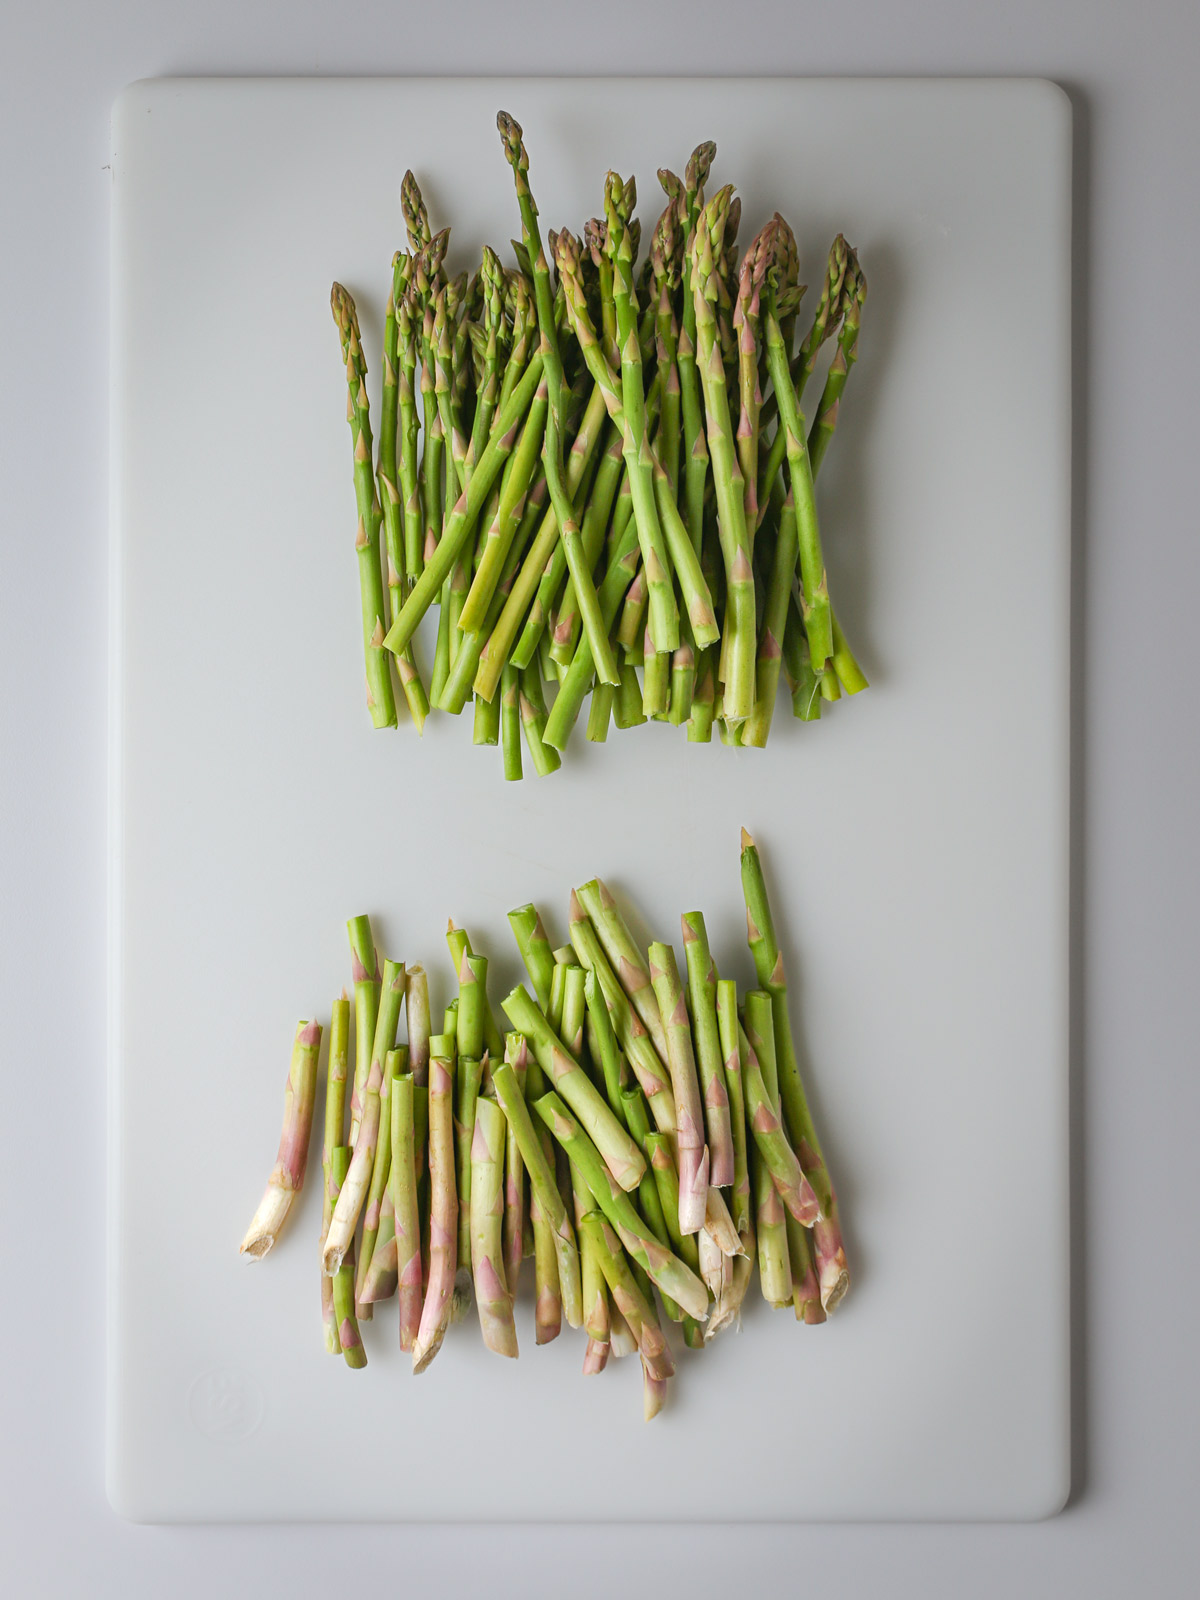 asparagus spears on a white cutting board with the woody stems broken off in a pile.